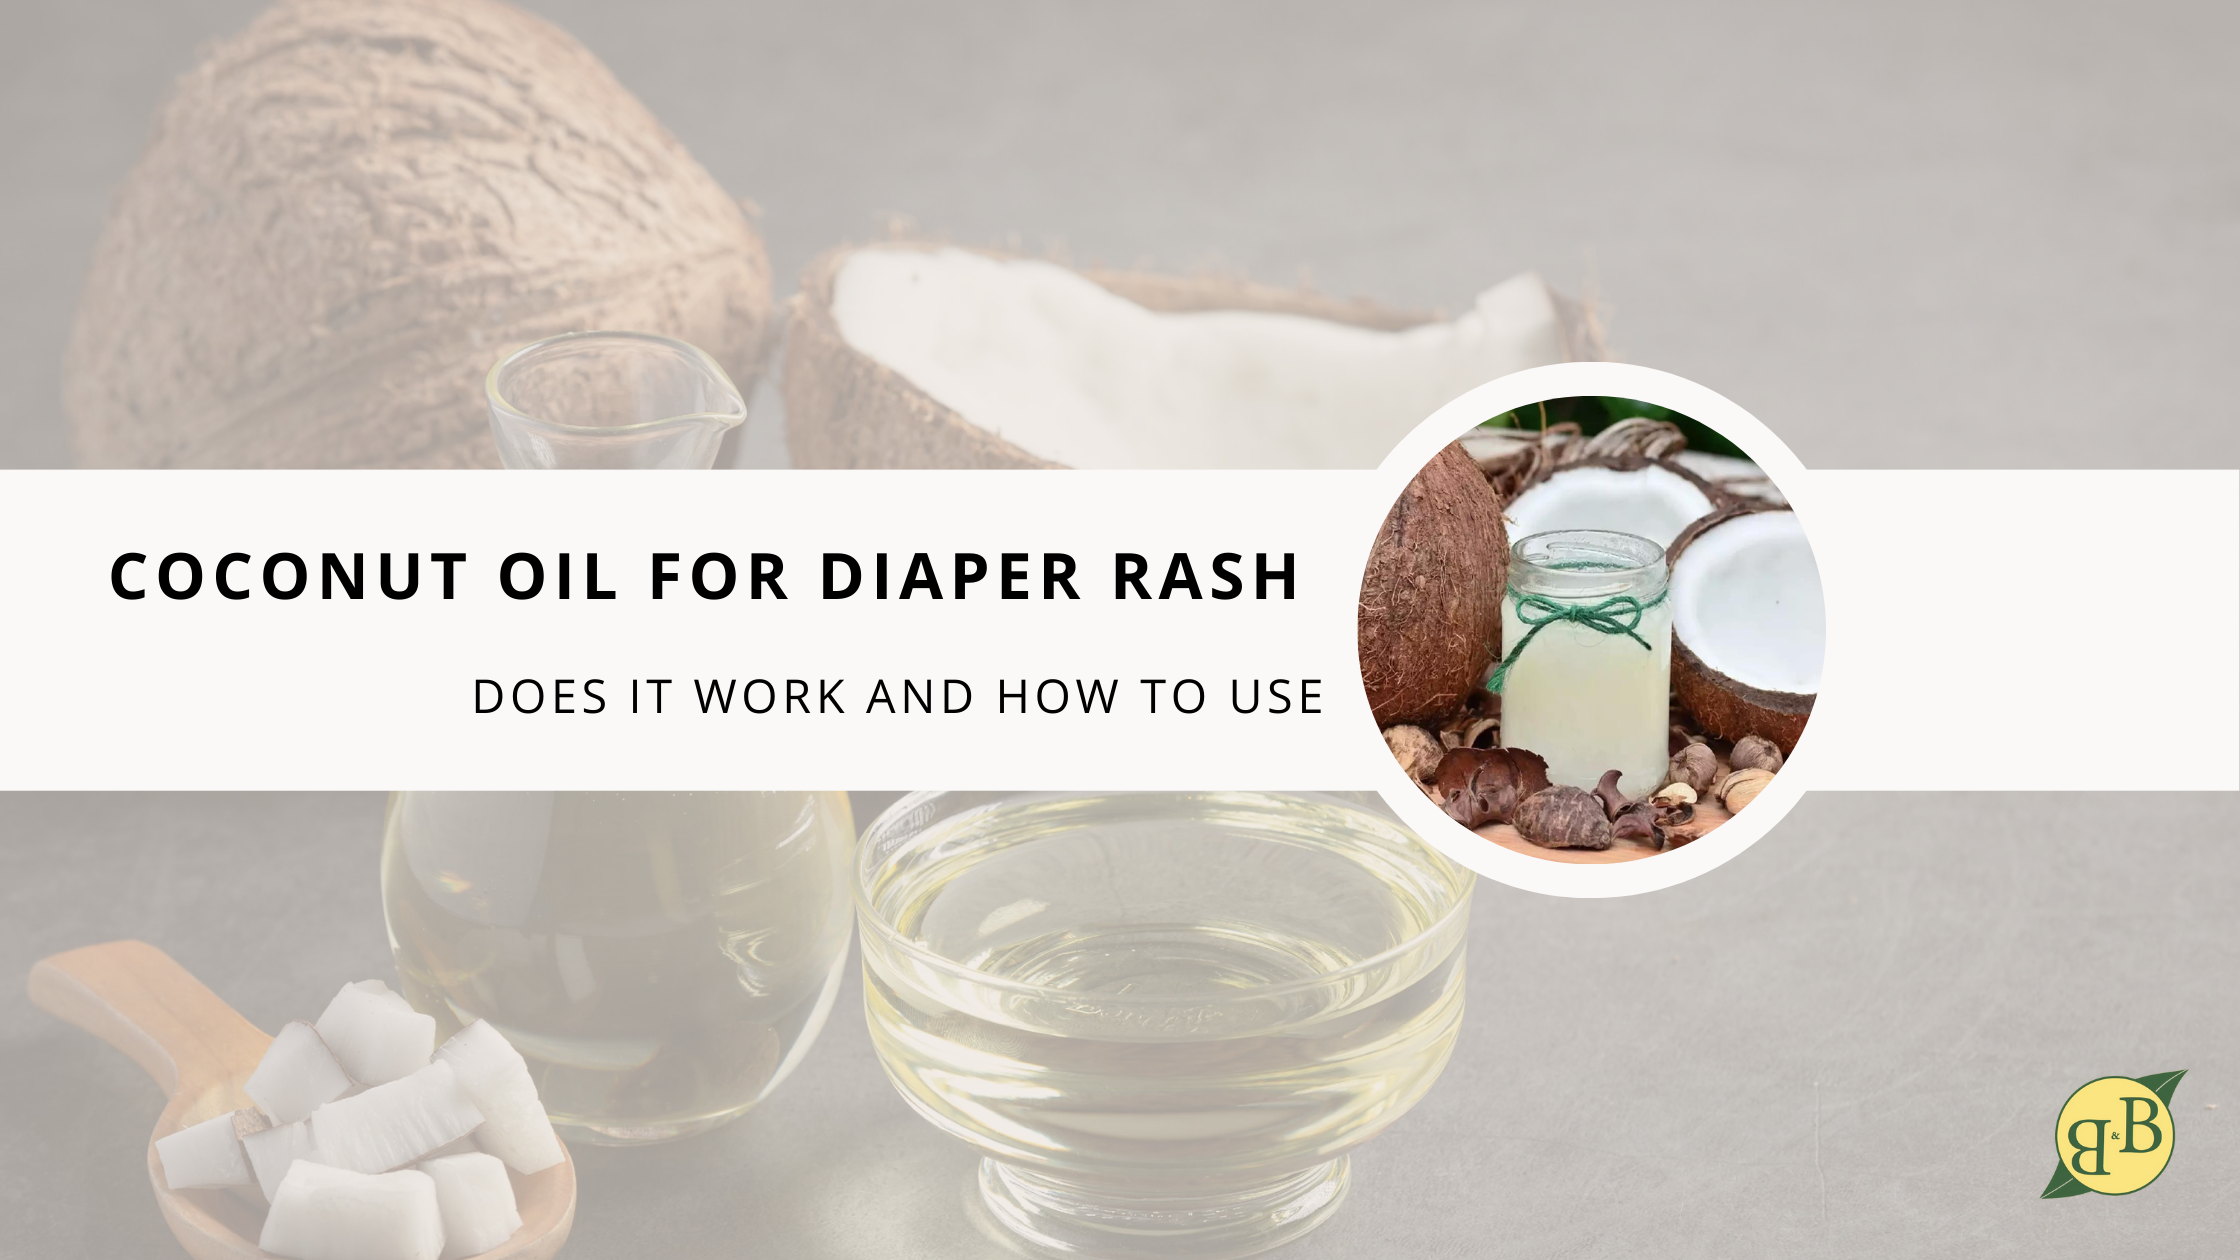 Coconut Oil dandruff and dry, Itchy scalp - Best for Diaper Rash